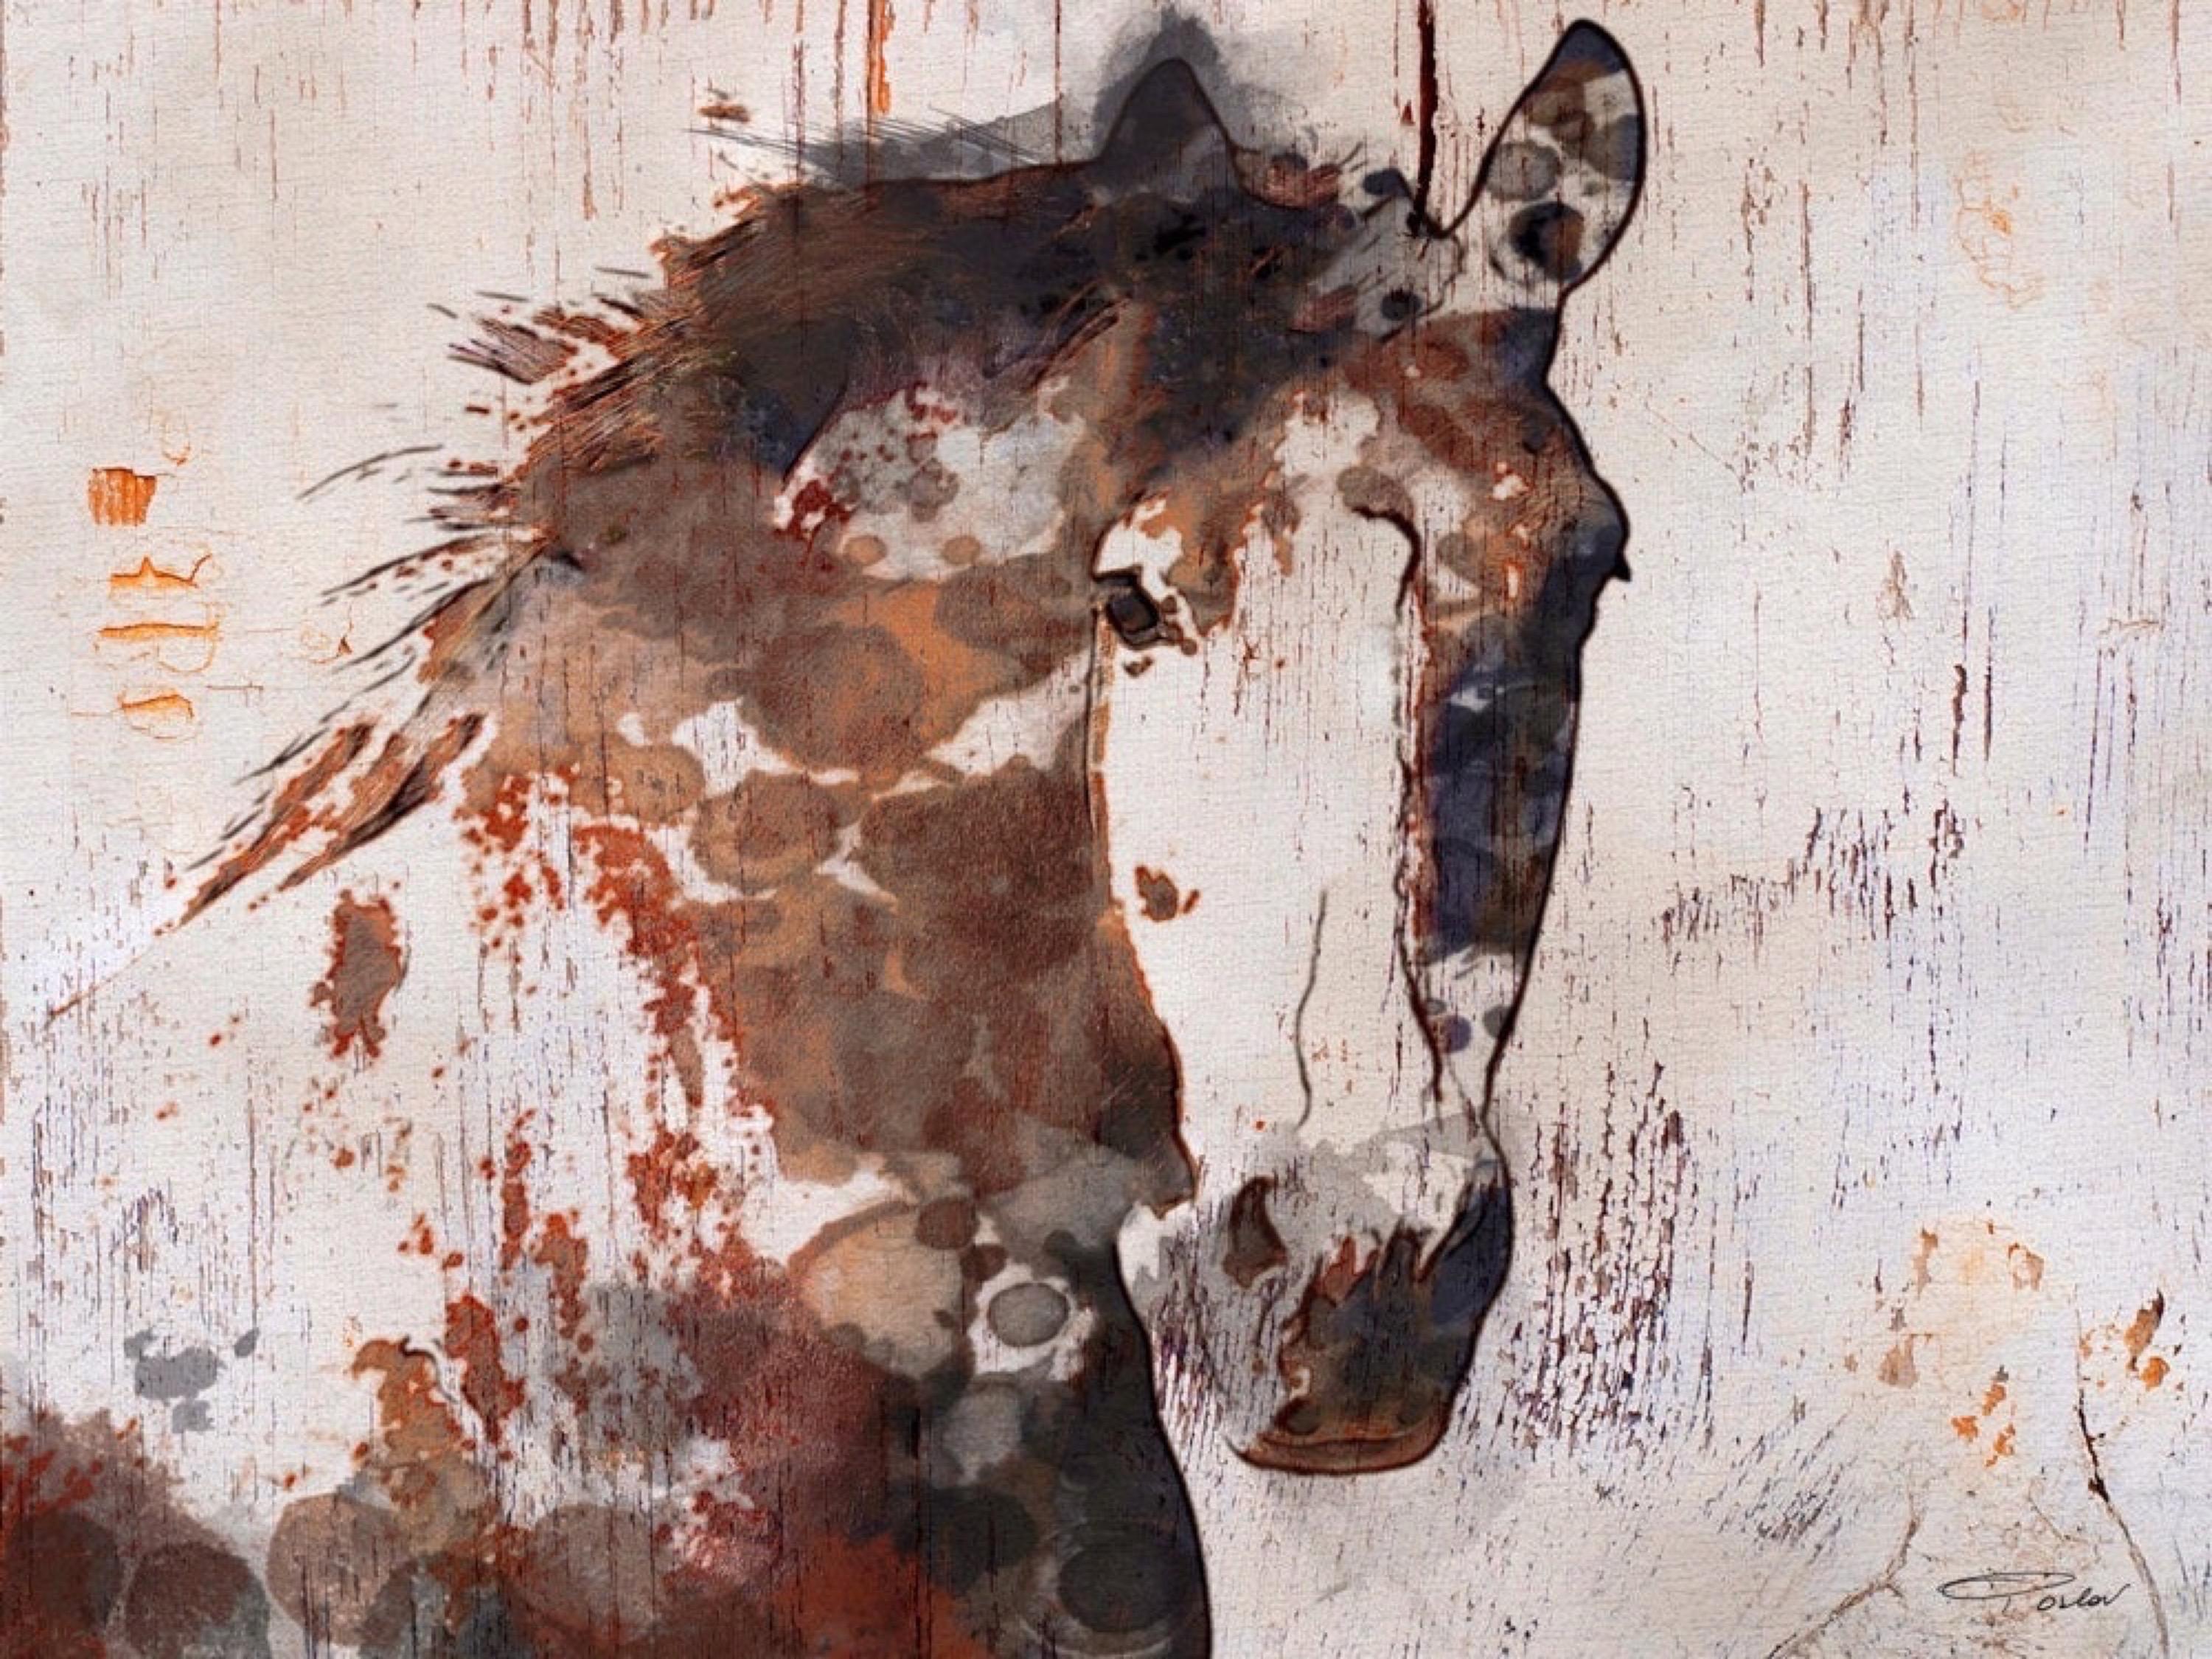 Gorgeous Chestnut Horse Fine Art Hand Embellished Giclee on Canvas 

Collector's Edition Embellished Art Canvas Giclee With Brushstrokes and rich texture.

State-of-the-art HAND EMBELLISHED ∽ MUSEUM QUALITY ∽ DISPLAY READY Giclee Reproduction
Each